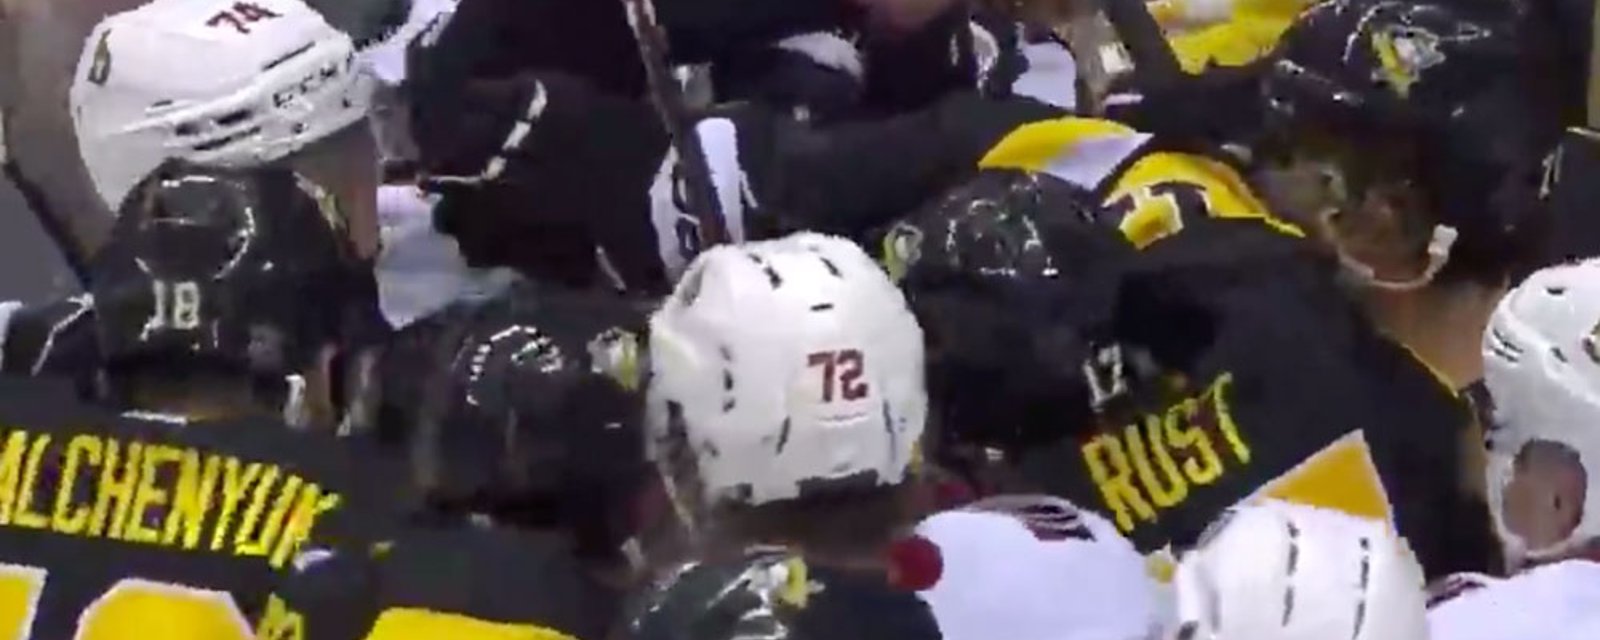 Huge brawl ensues with Evgeni Malkin at the centre of it! 